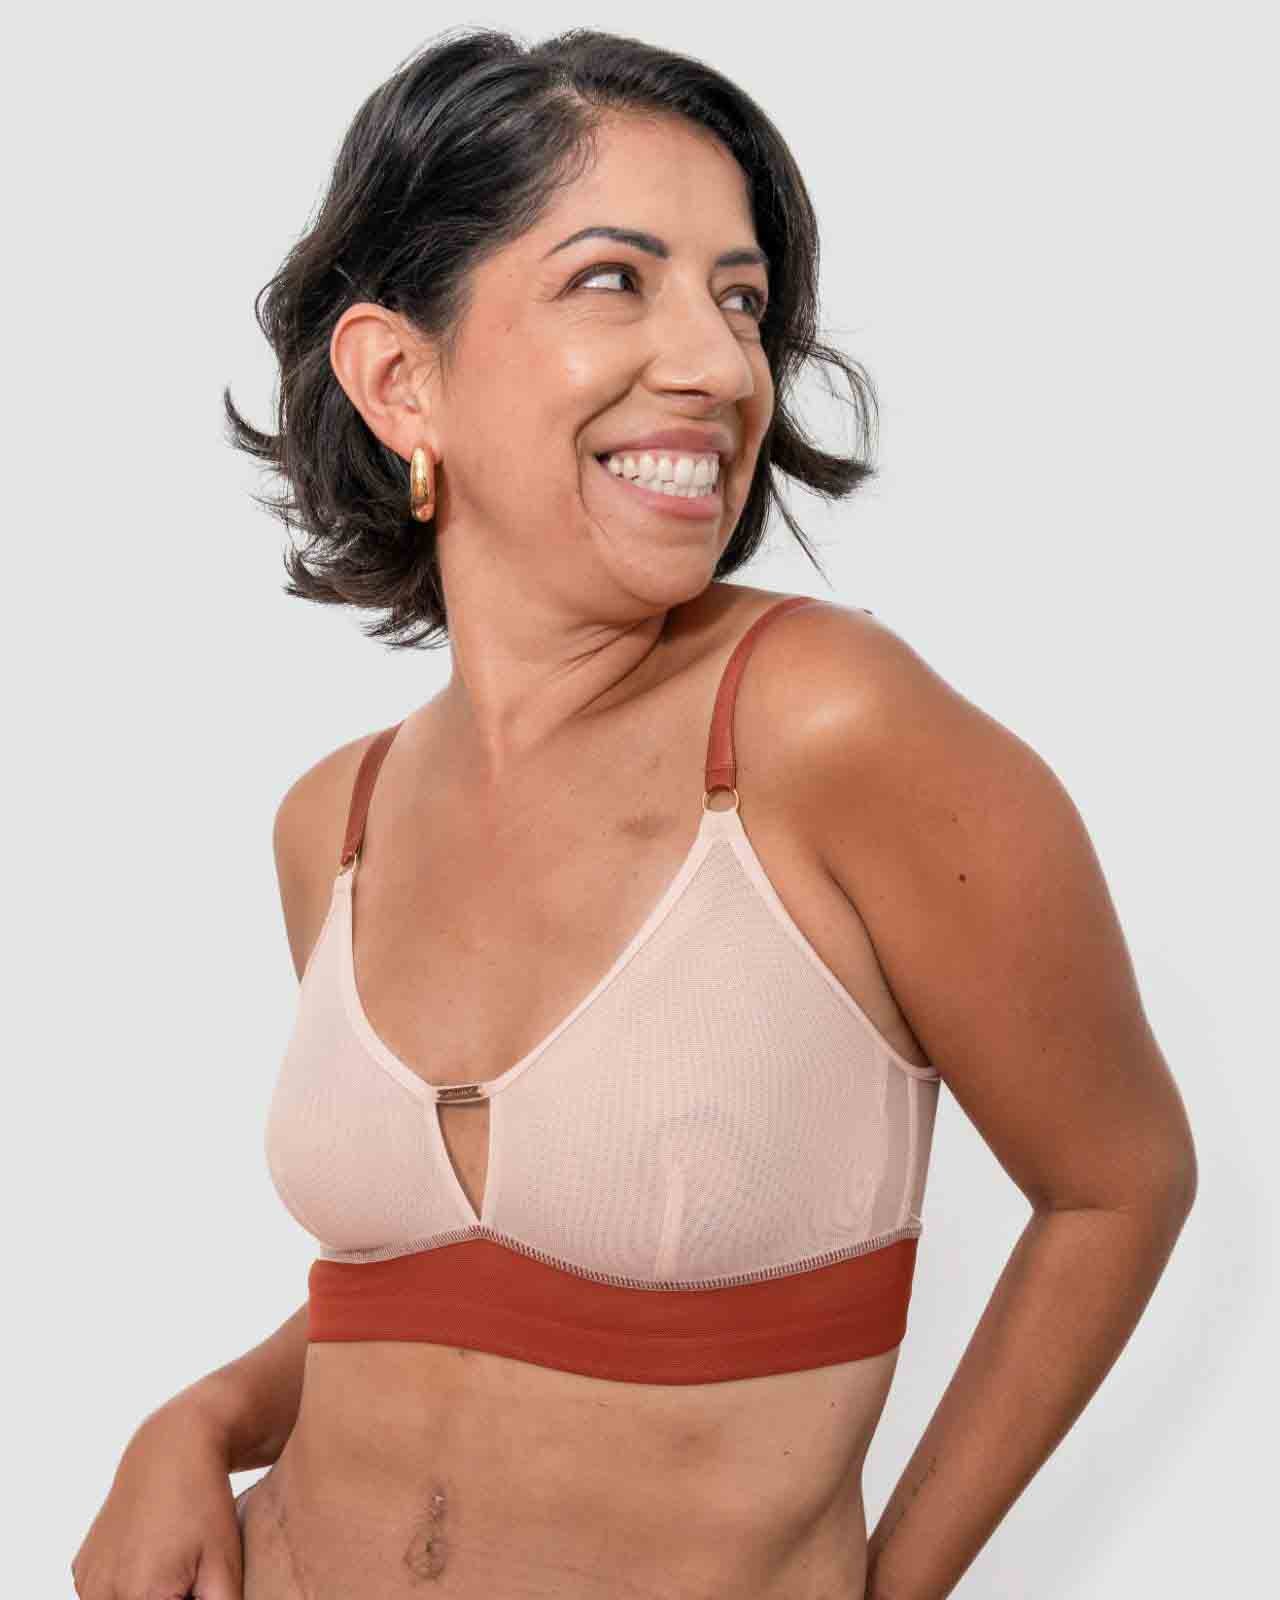 Victoria Mesh Keyhole Bralette (pocketed) By AnaOno - S/32-XXL/40